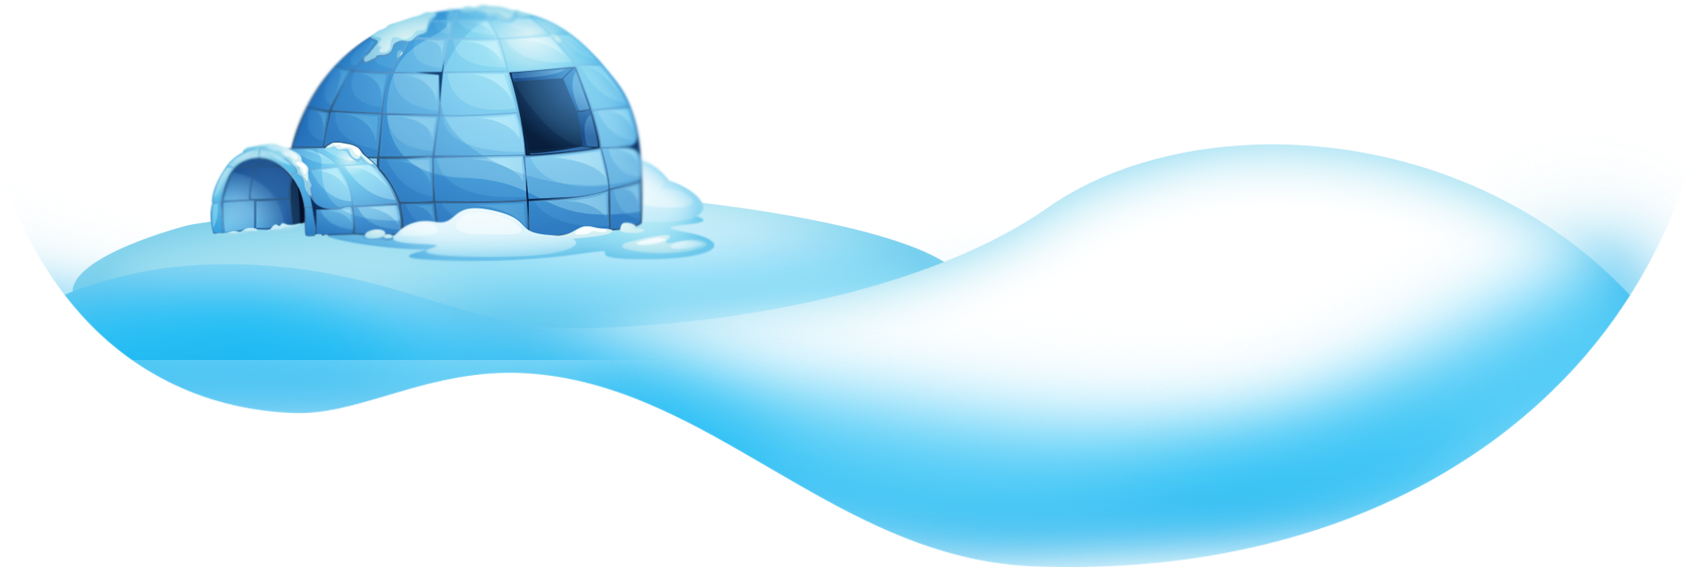 Illustration Of An Icy Igloo - Rectangle Magnet (1854x586)